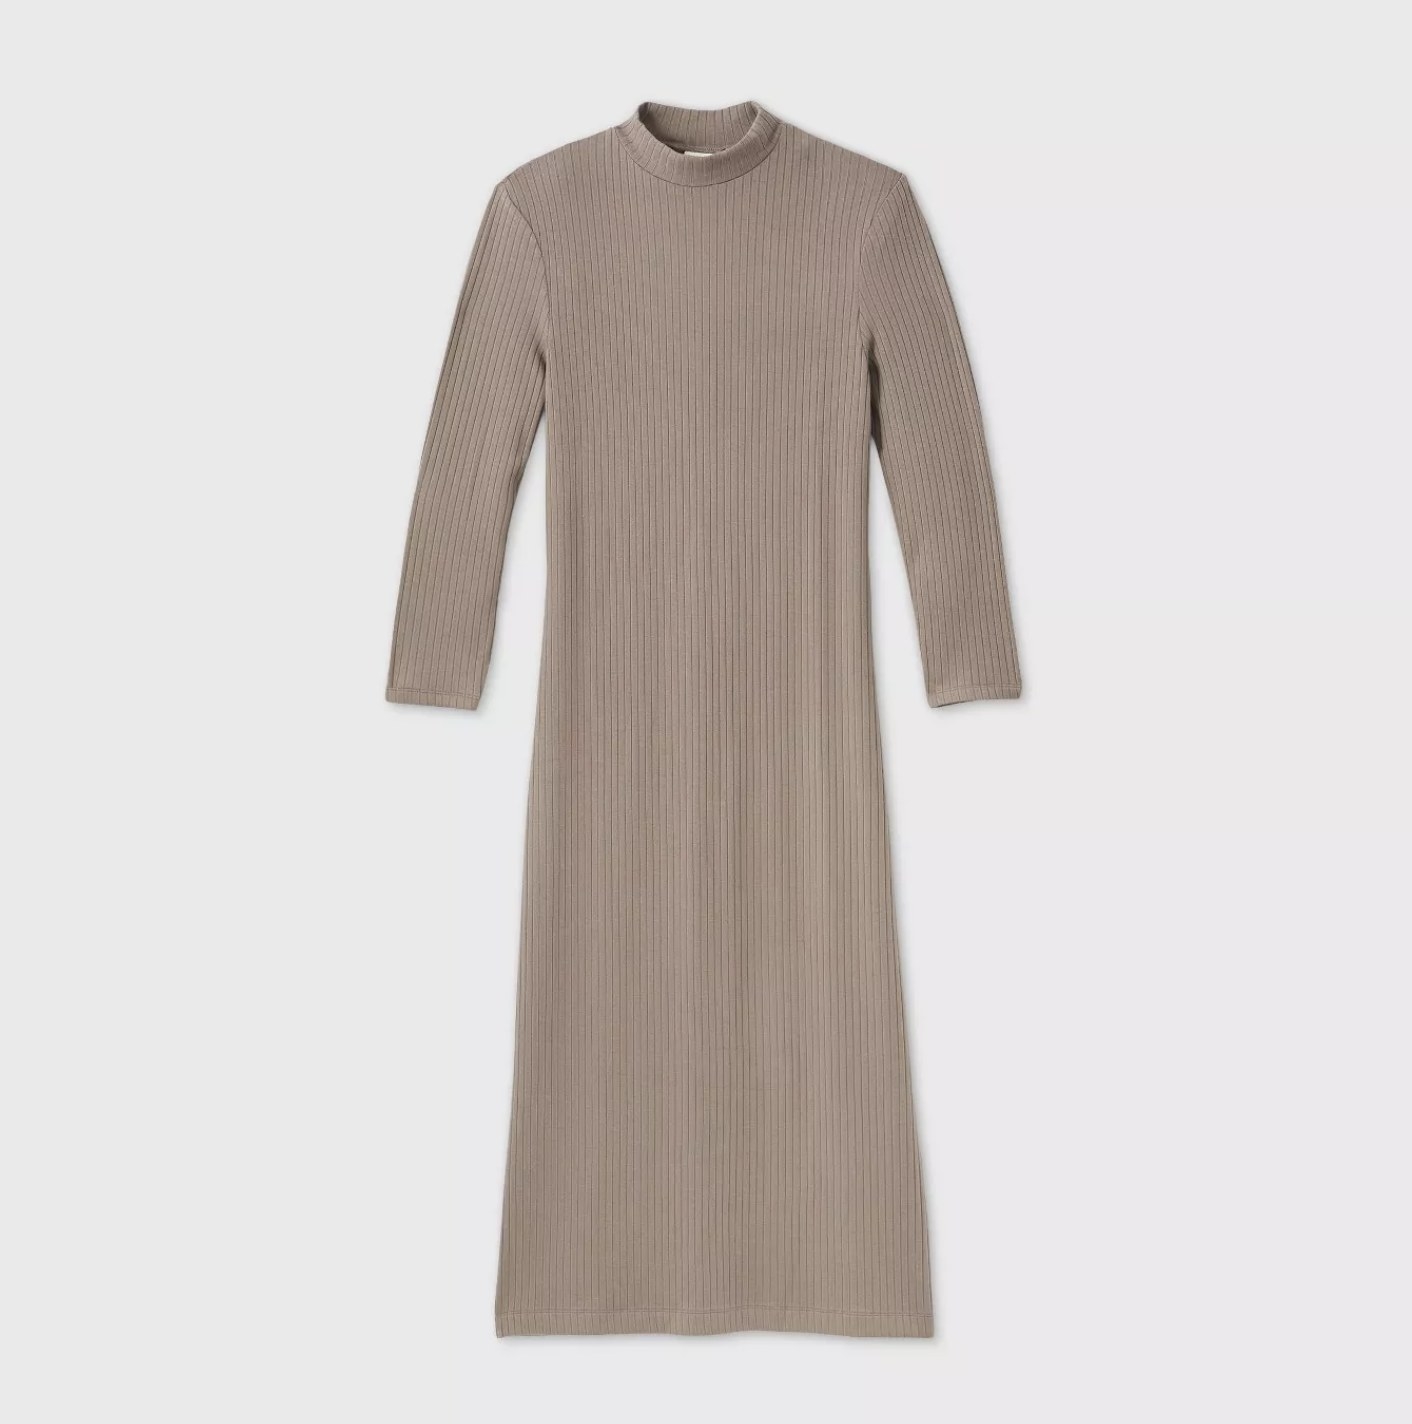 A muted grey long sleeve ribbed midi dress with a mockneck